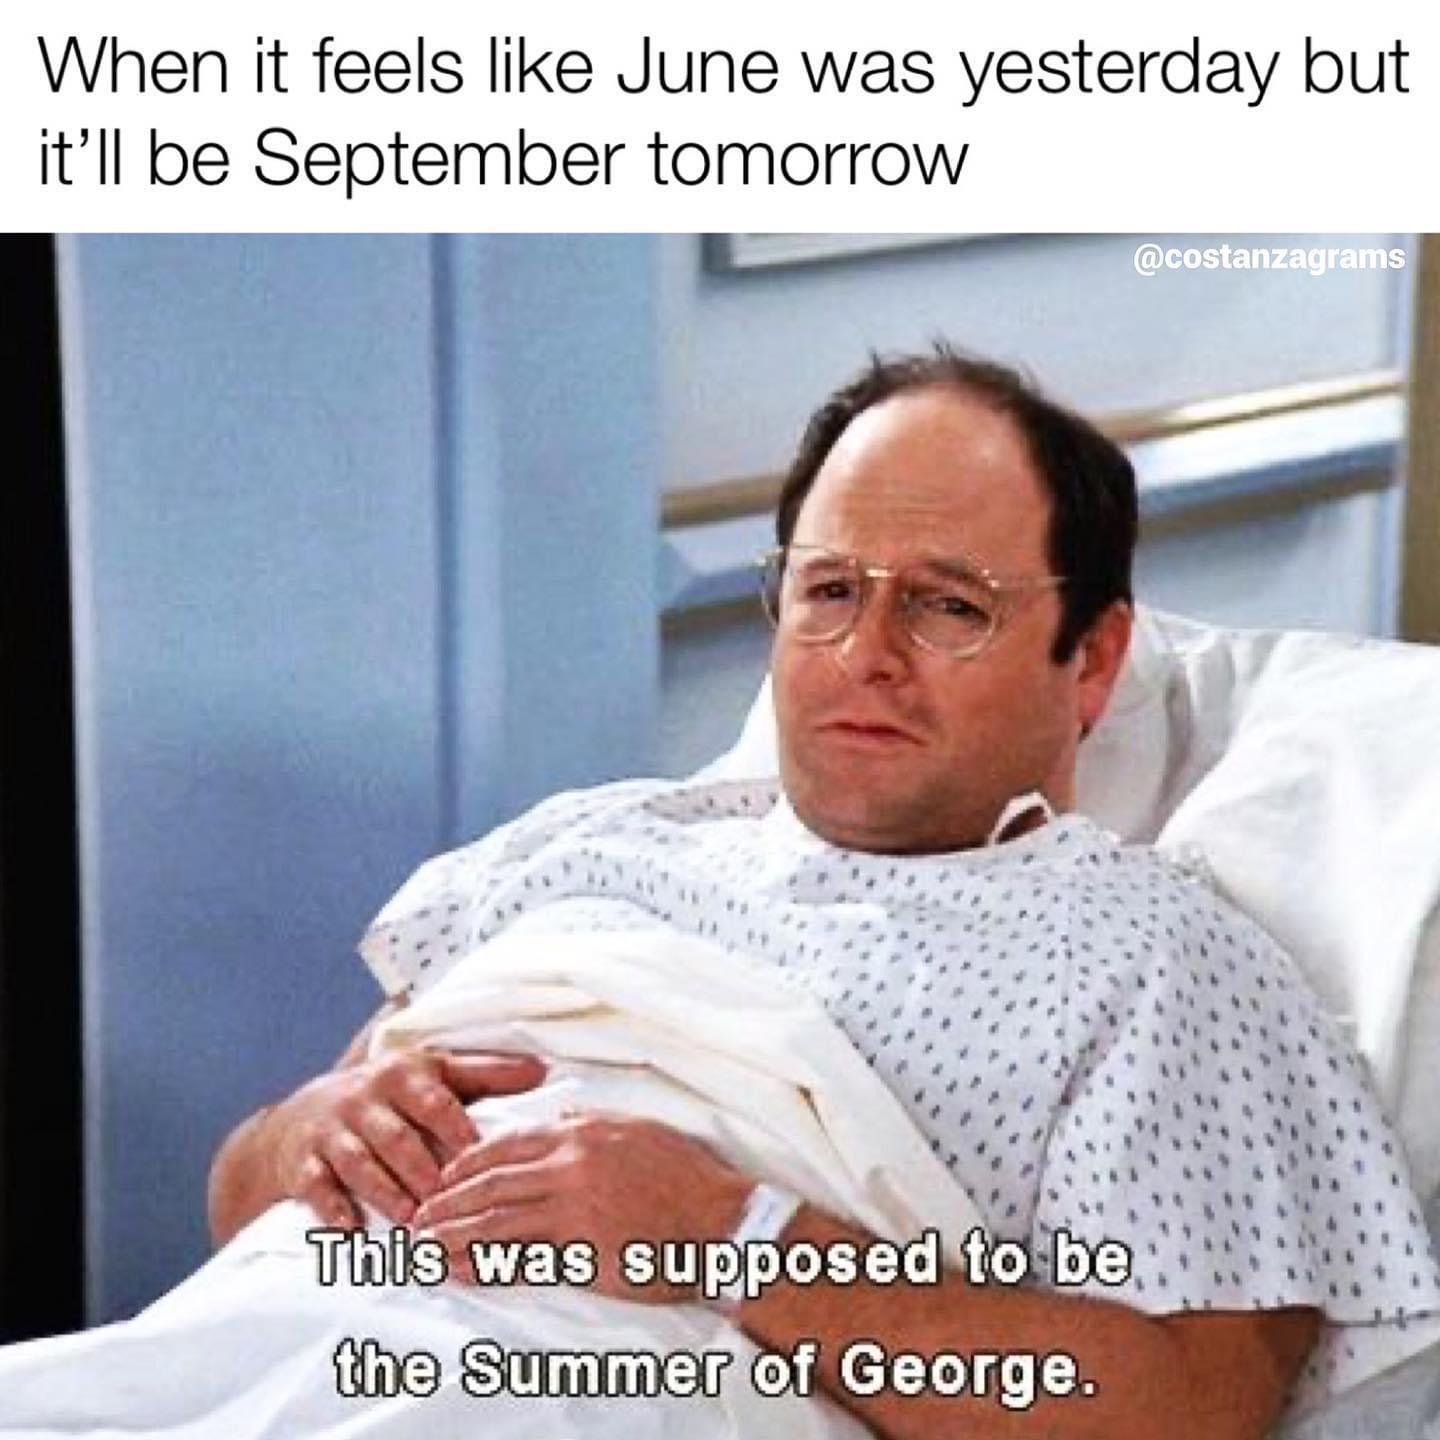 supposed to be the summer - When it feels June was yesterday but it'll be September tomorrow This was supposed to be the Summer of George.